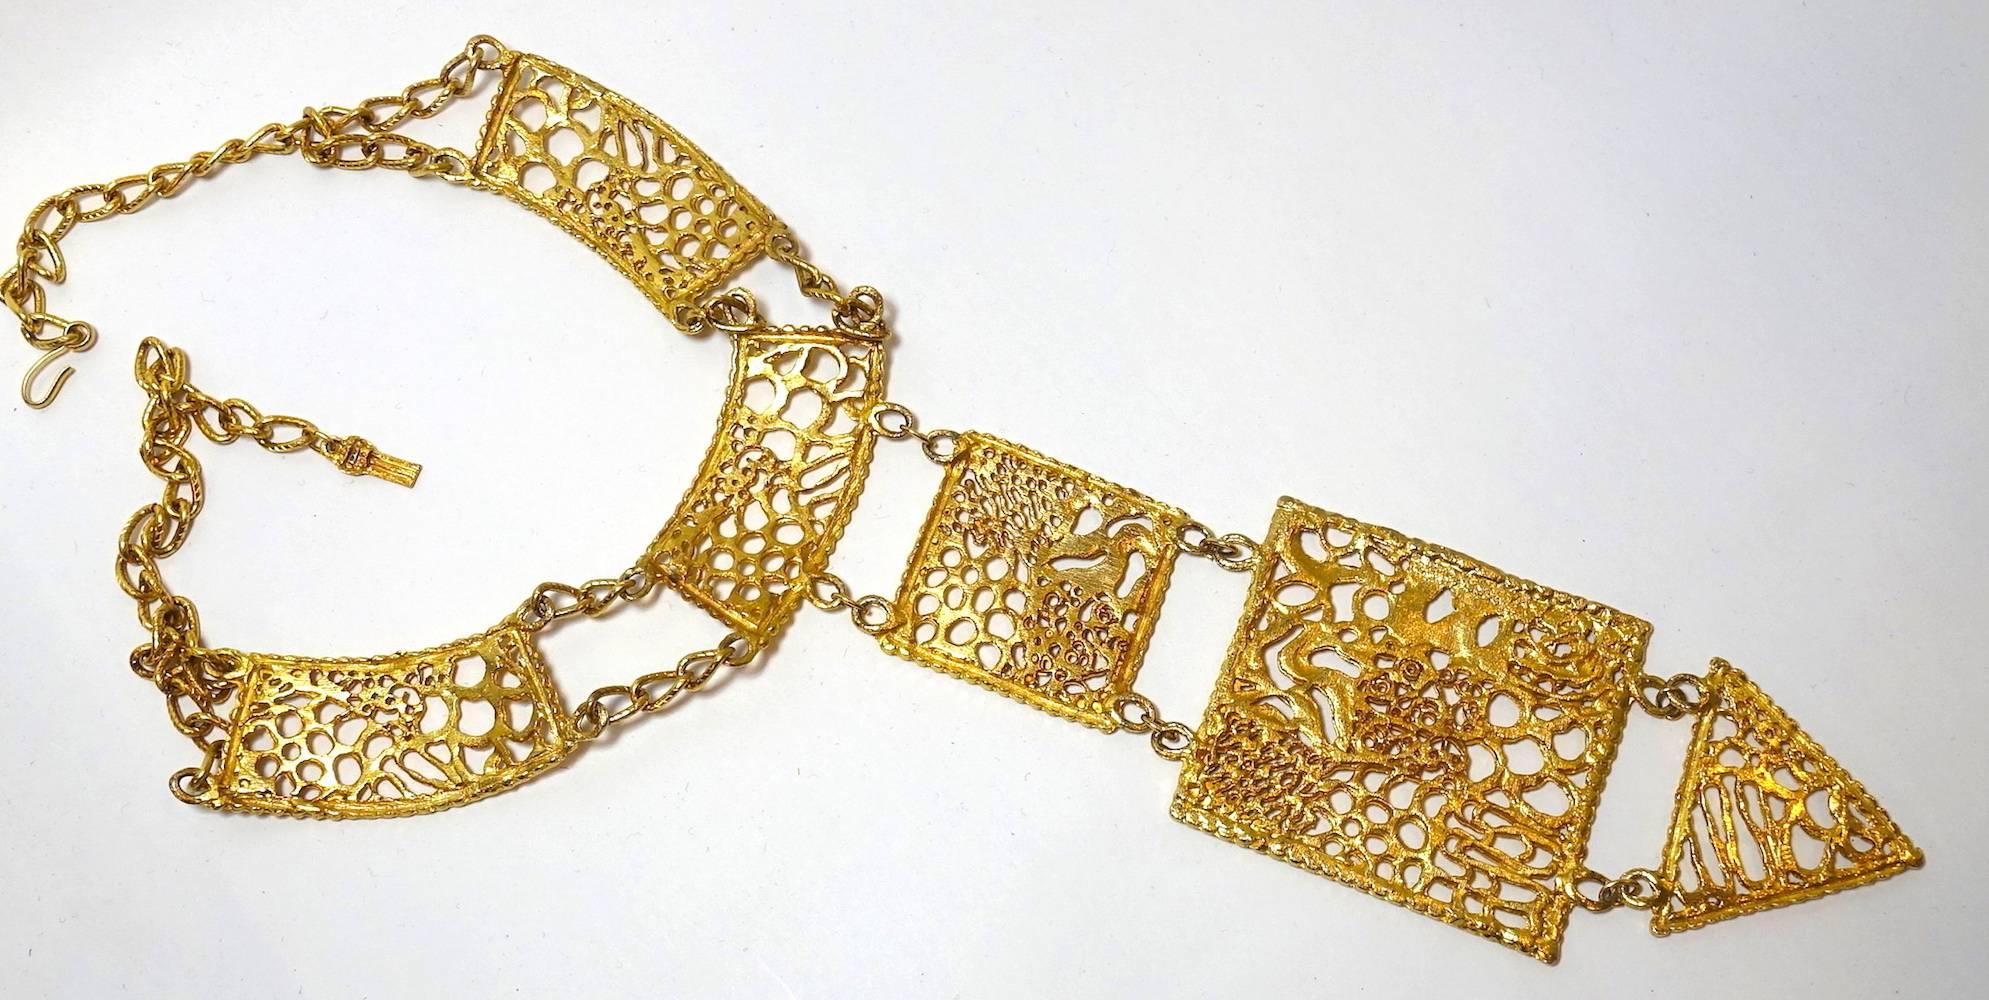 This vintage 1970s necklace features a heavily etched, open-work design in a gold-plated base metal setting.  In excellent condition, this necklace measures 24” with an 11” front drop with a hook closure.  